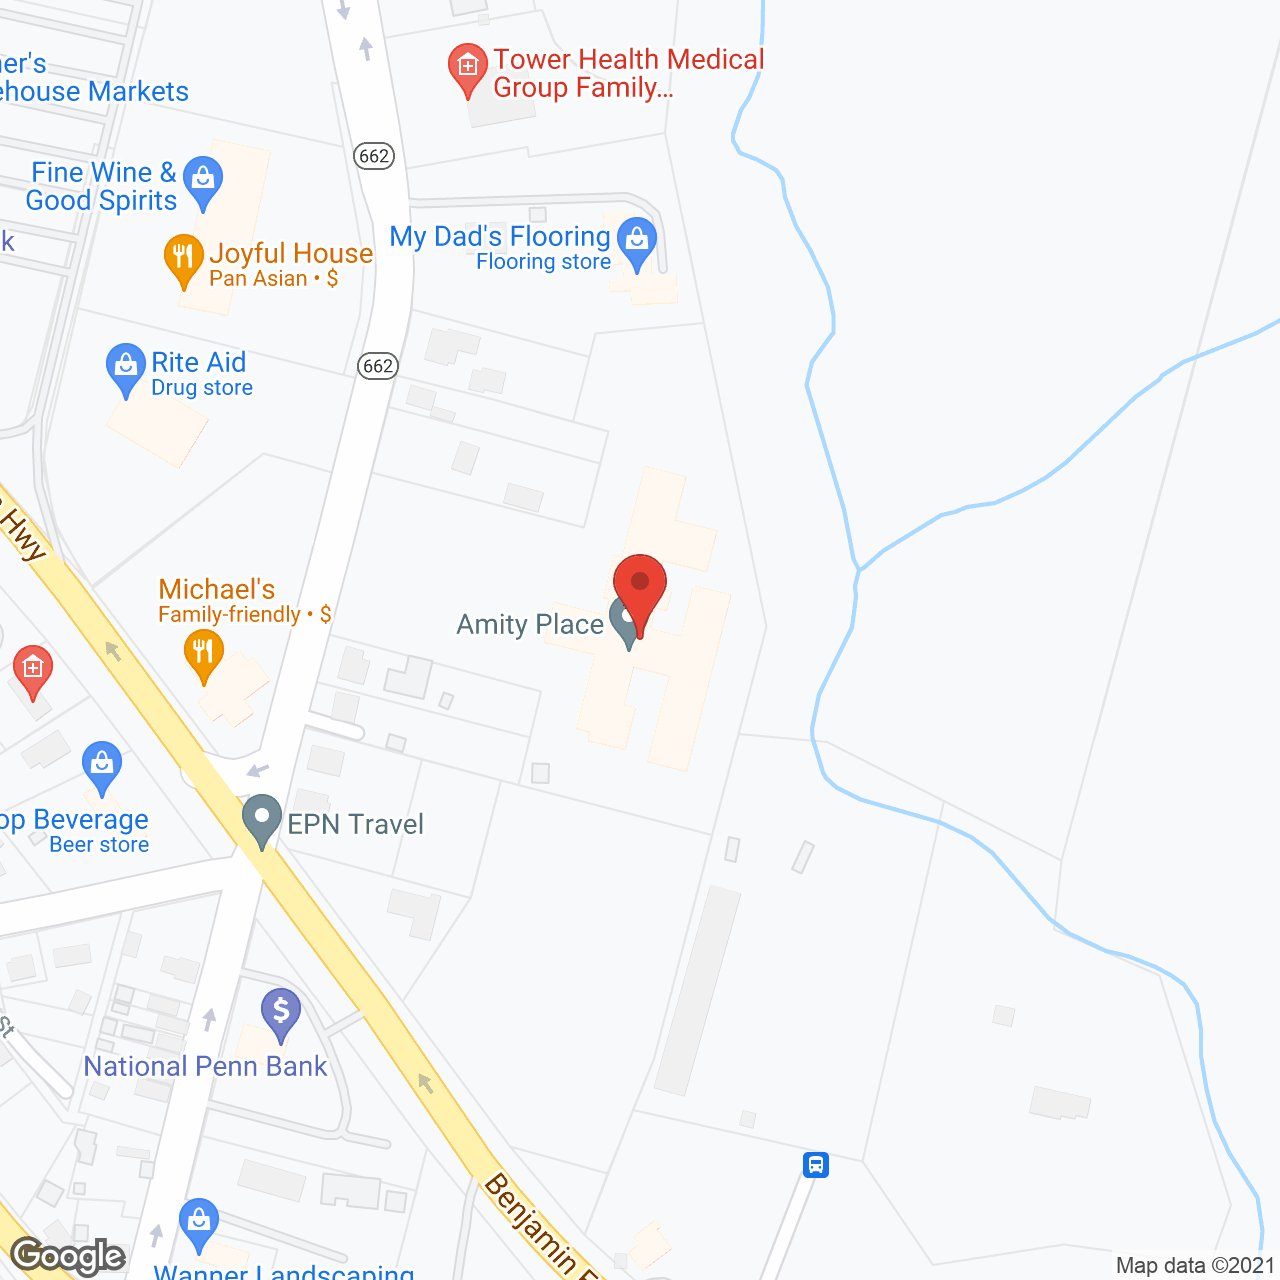 Amity Place in google map